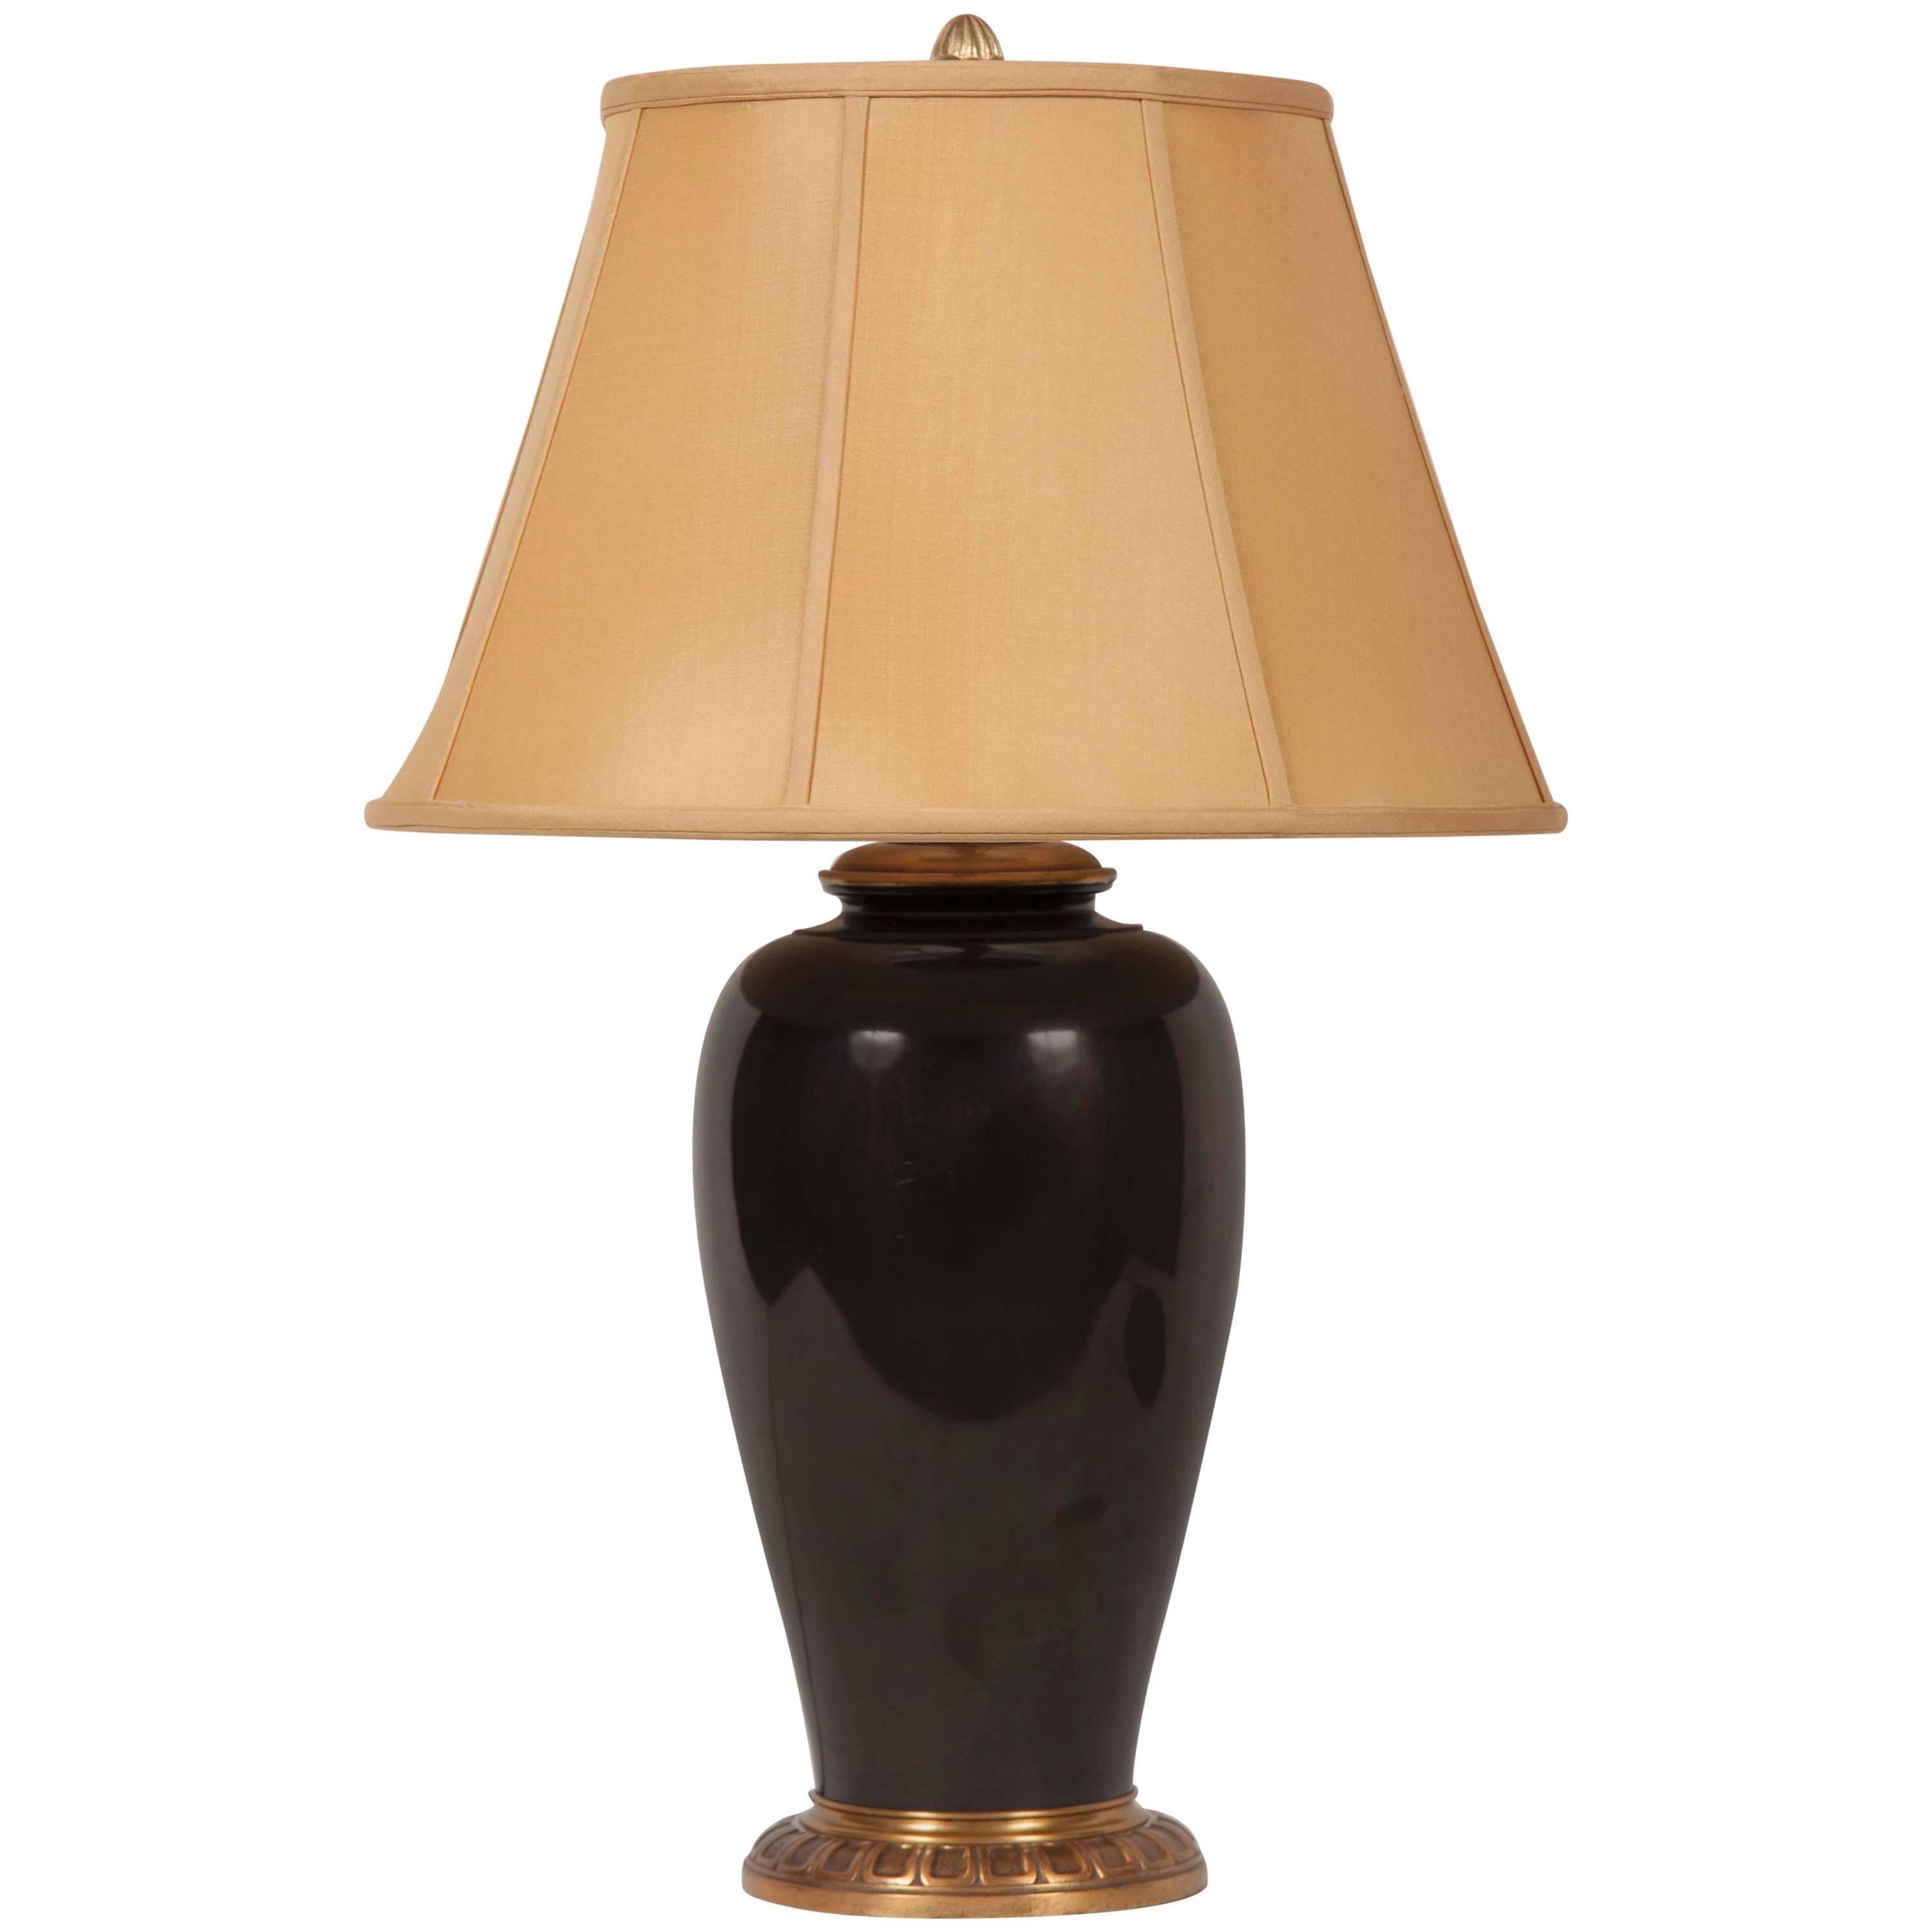 20th Century Patinated Metal and Polished Bronze Table Lamp